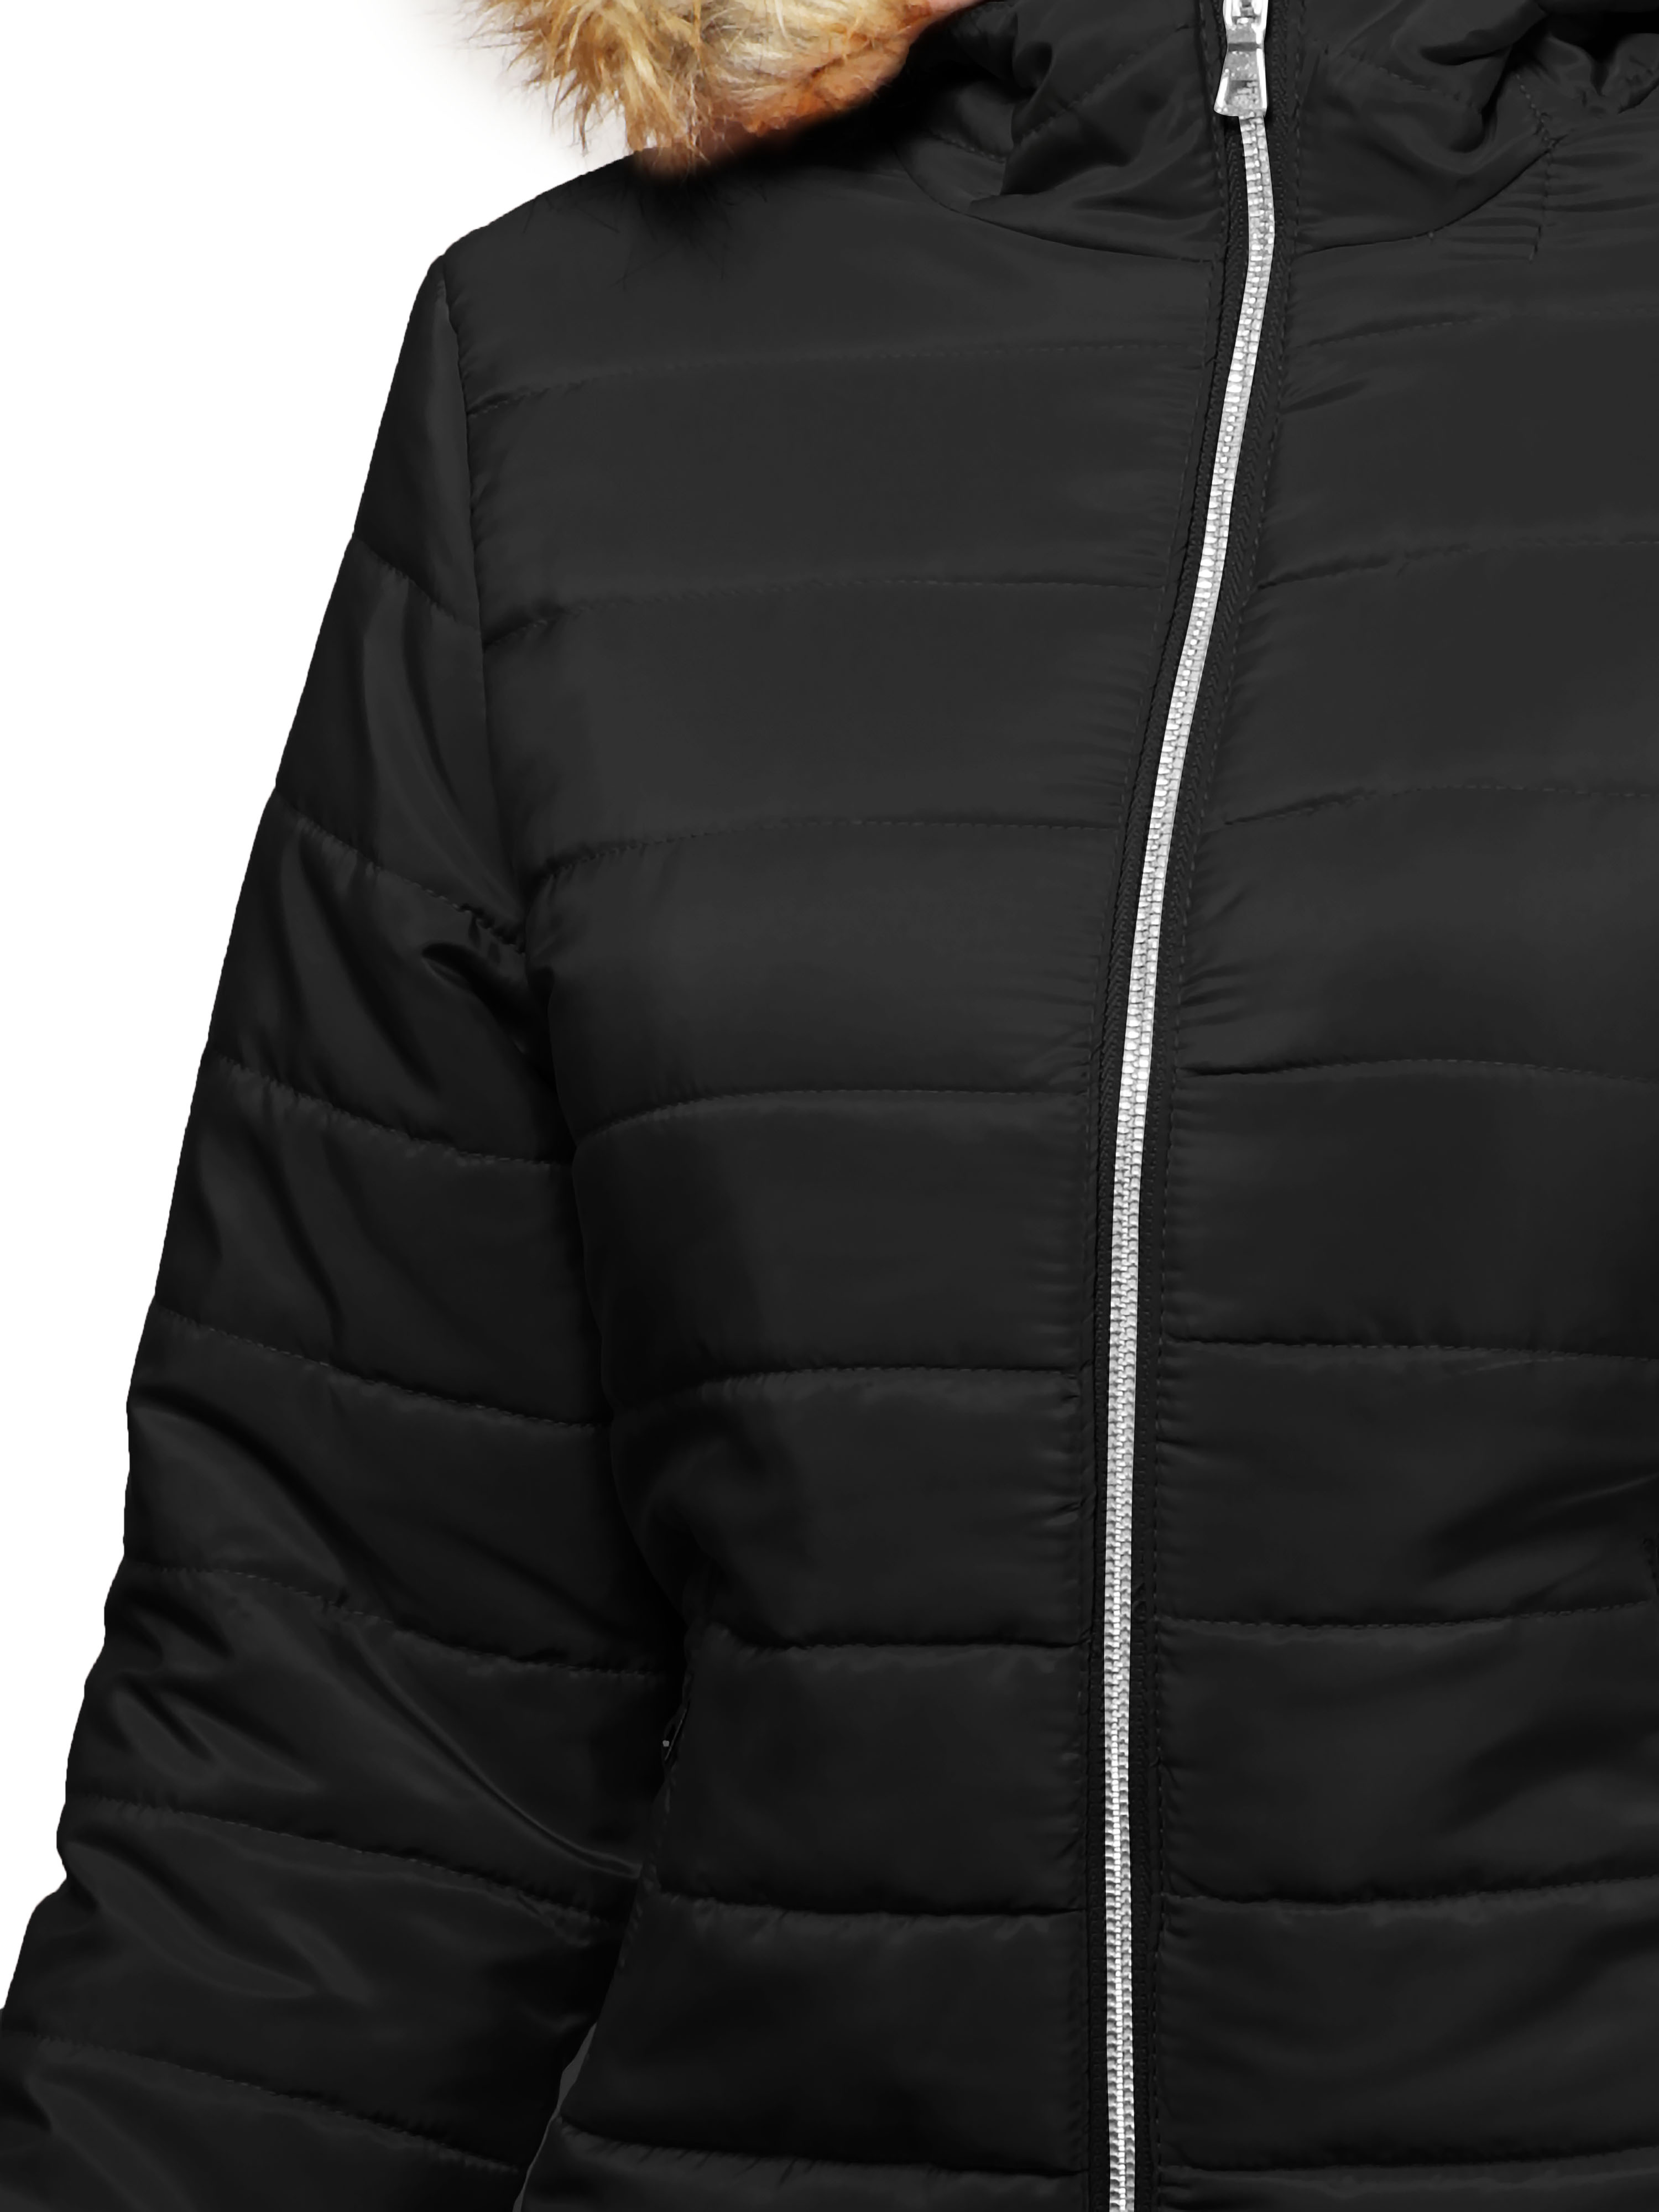 Hat and Beyond Womens Premium Lightweight Puffer Jacket with Detachable Fur Hood Padded Outerwear